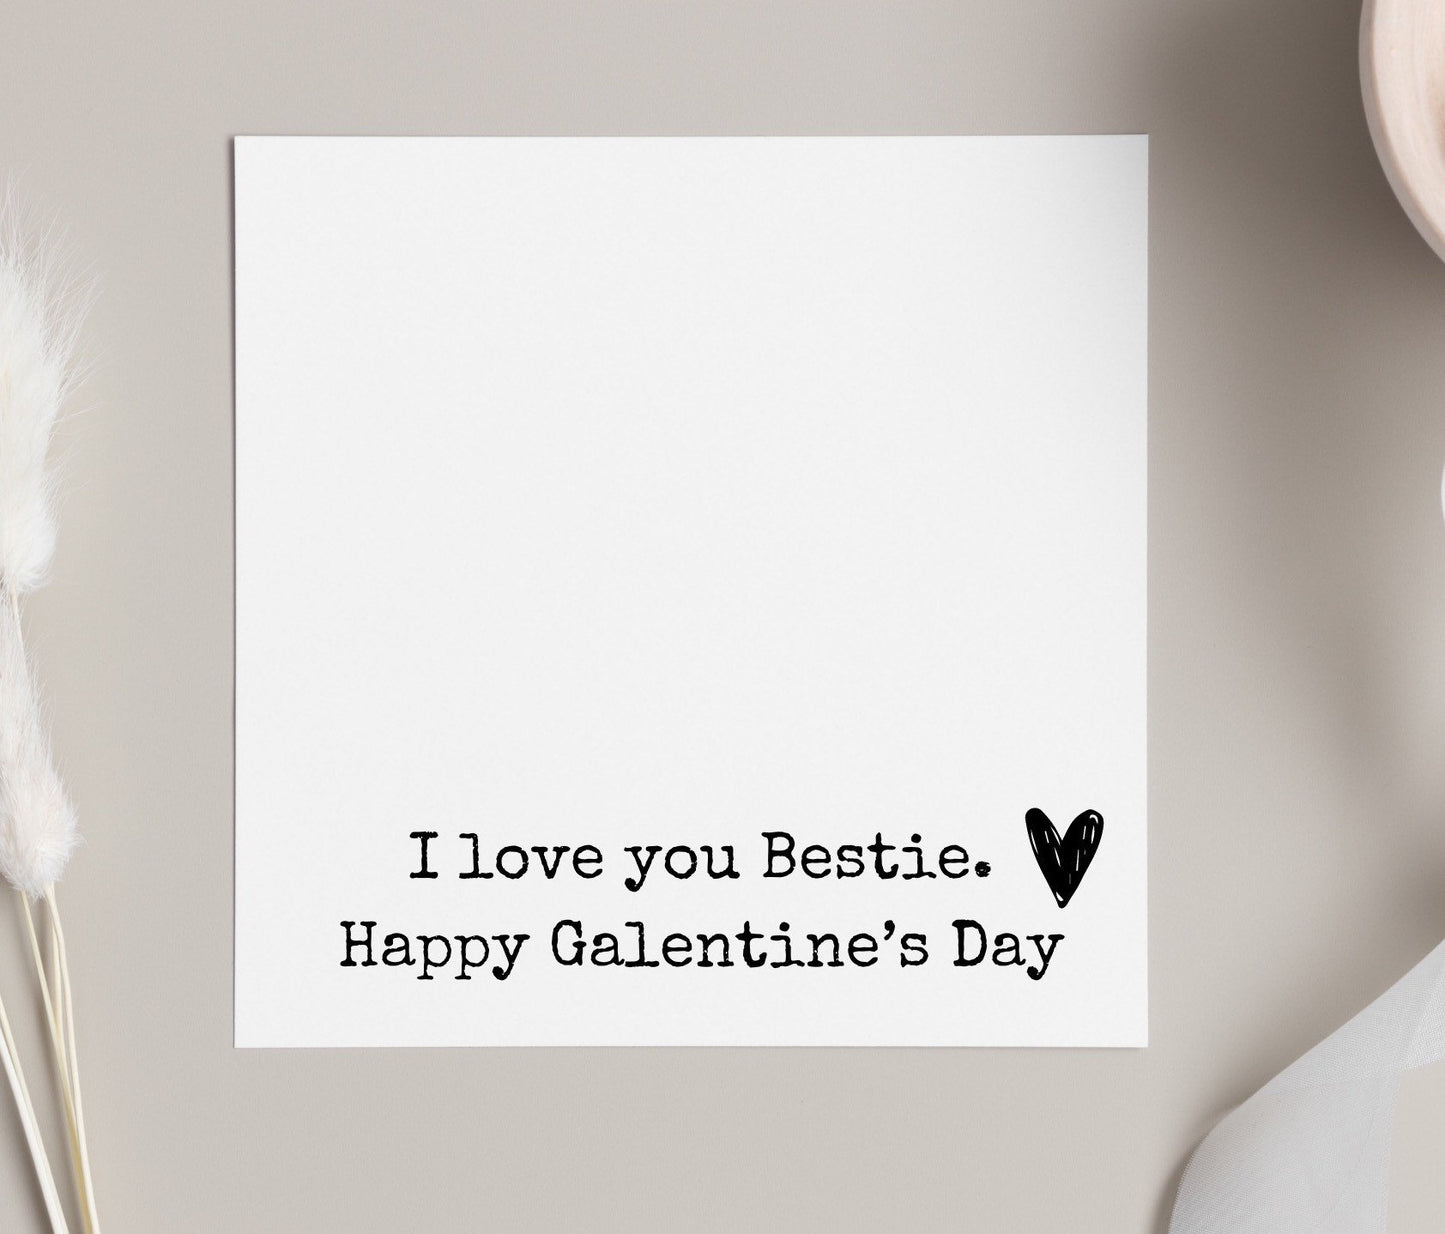 I love you Bestie, happy Galentines day card, Galentines card for best friend, single gals on valentines, friendship cards